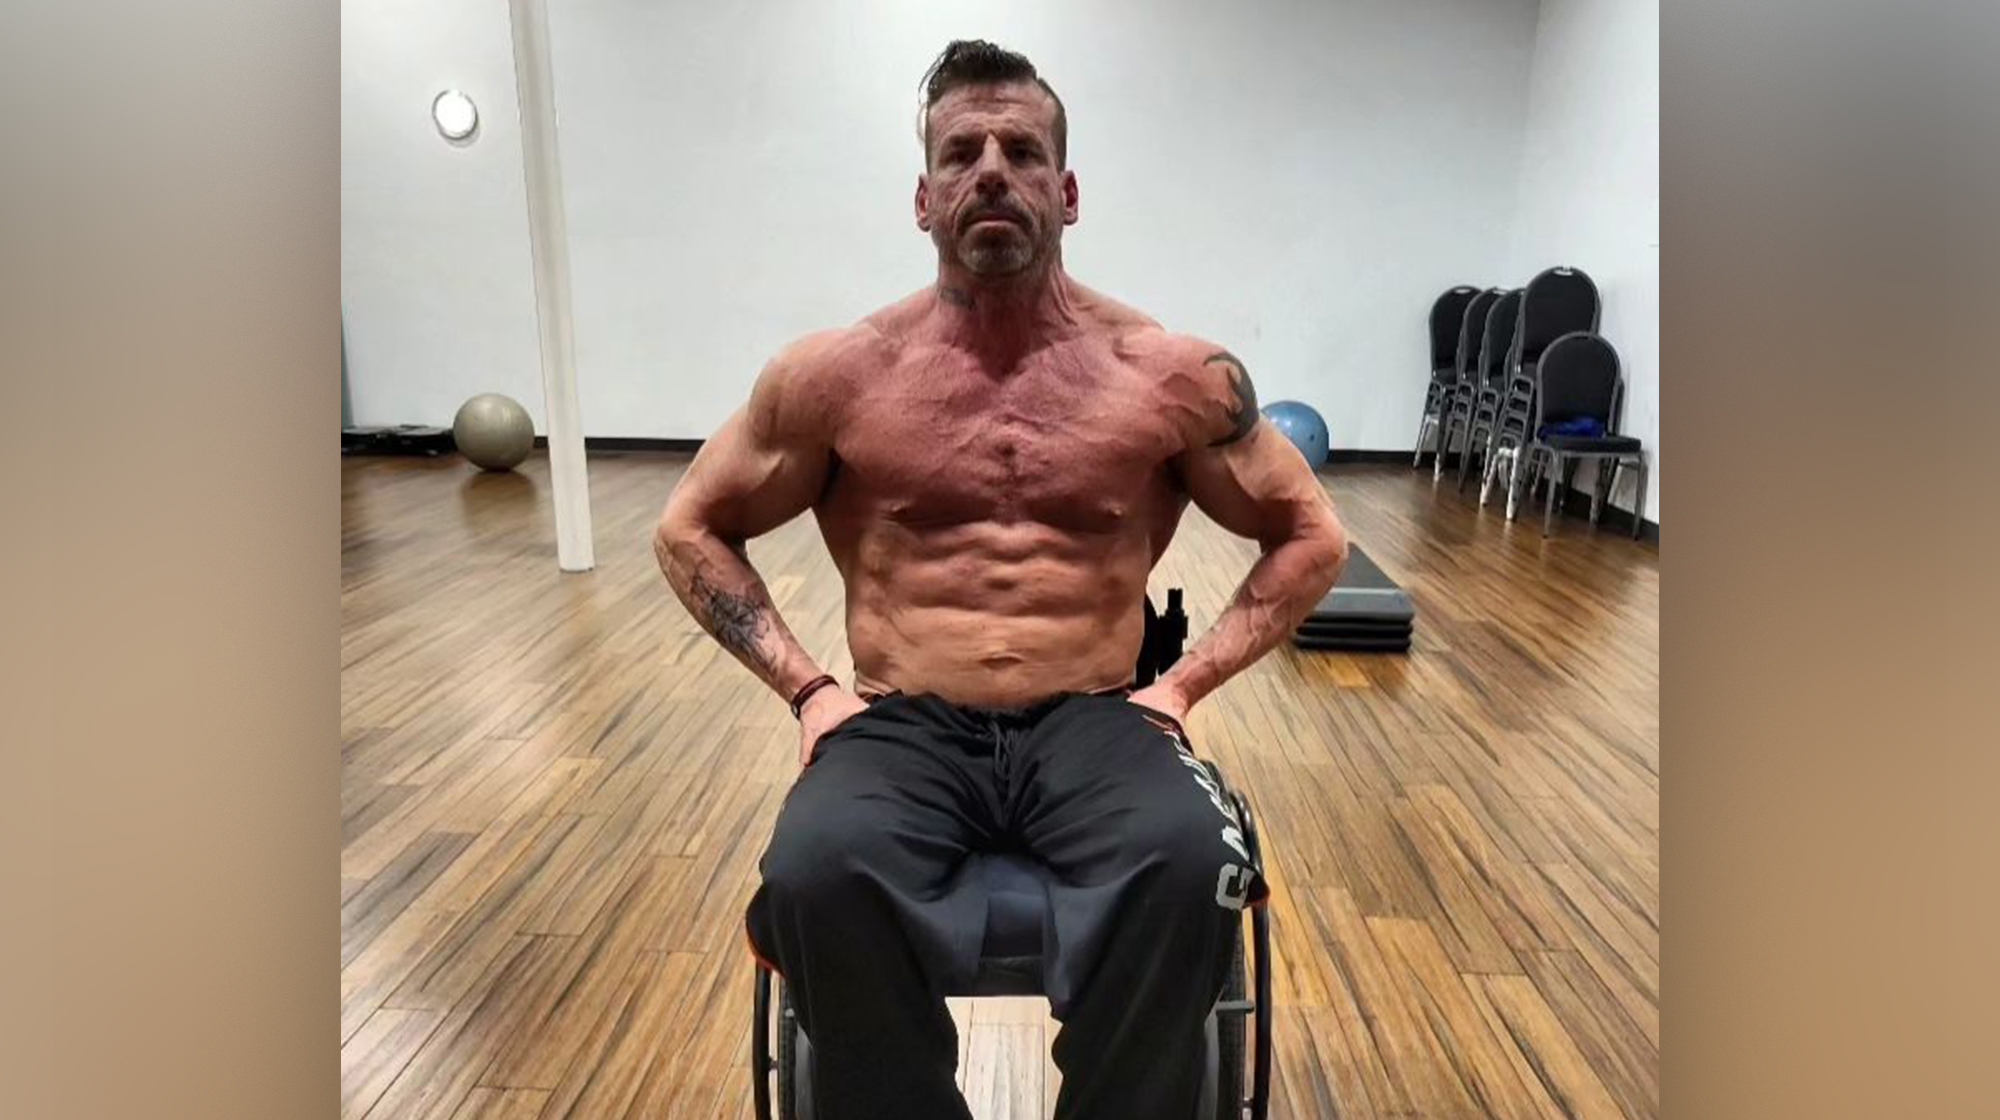 bodybuilder chad mccrary, who continued competing after paralyzation, dead at 49